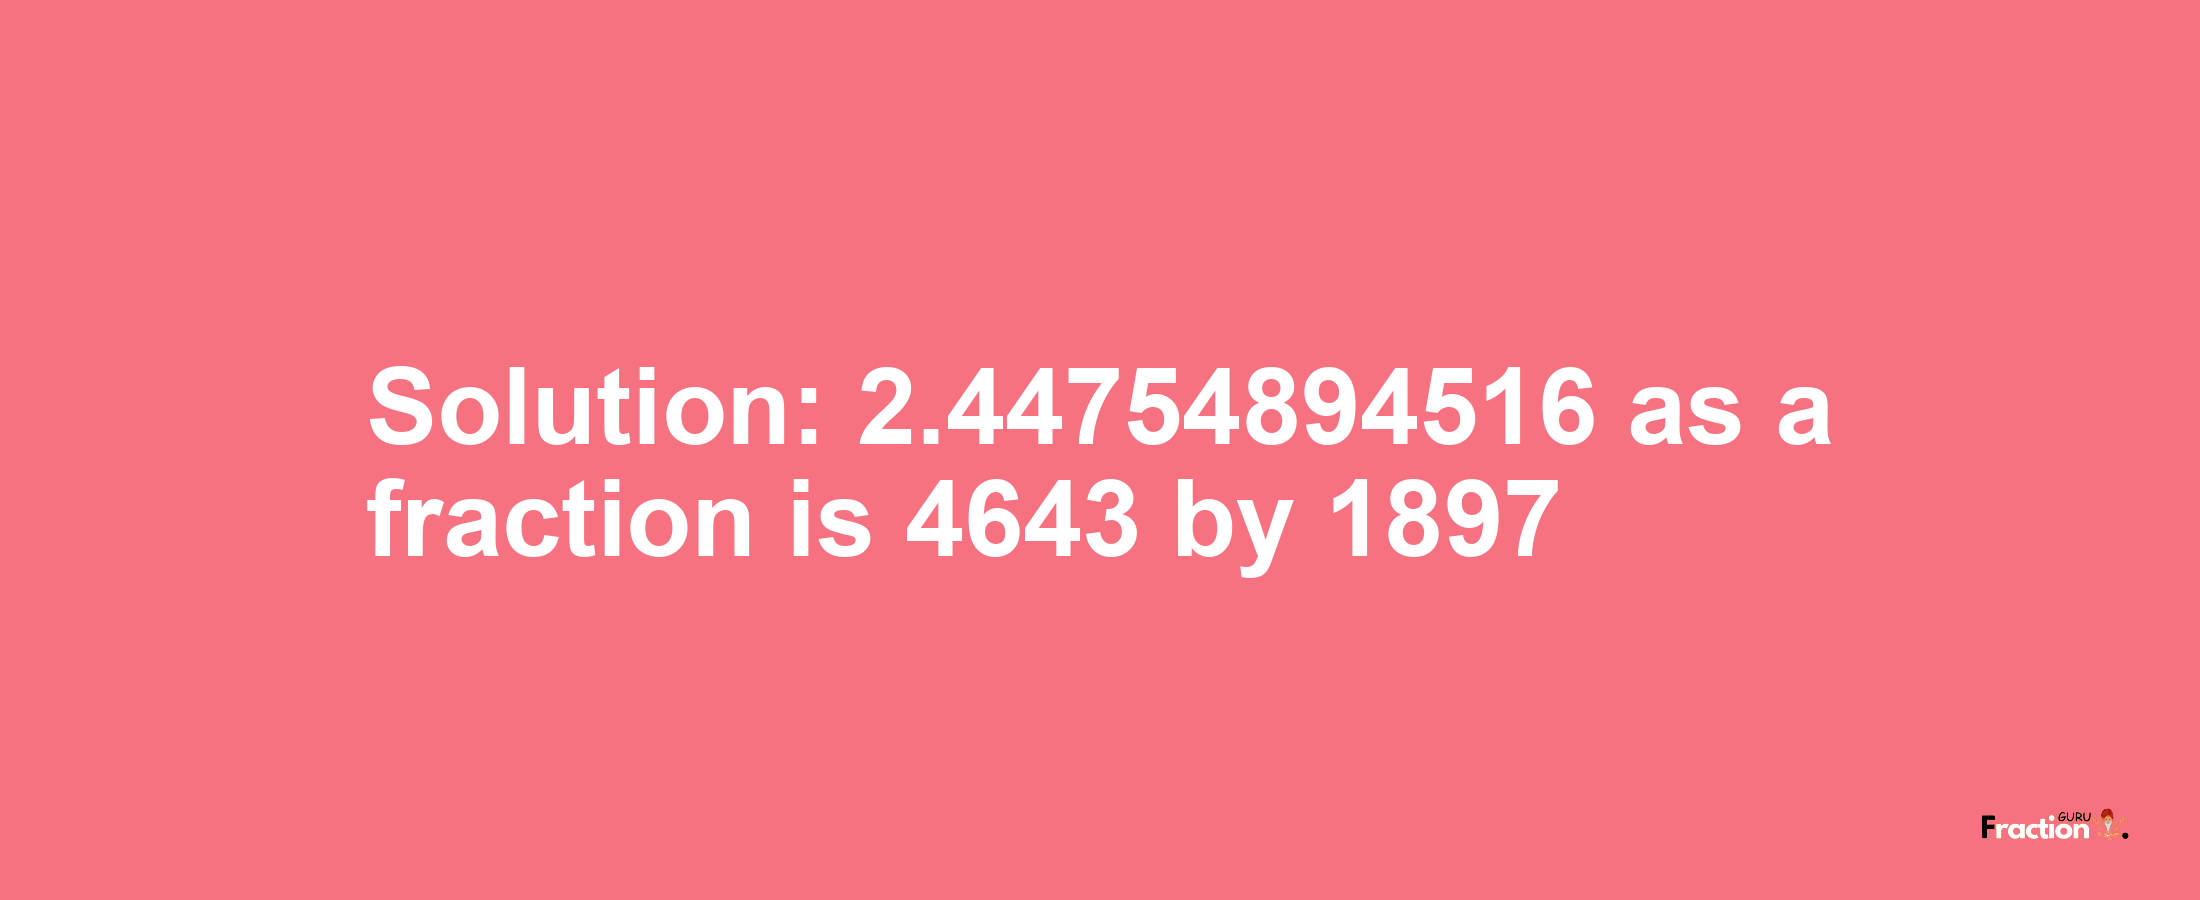 Solution:2.44754894516 as a fraction is 4643/1897